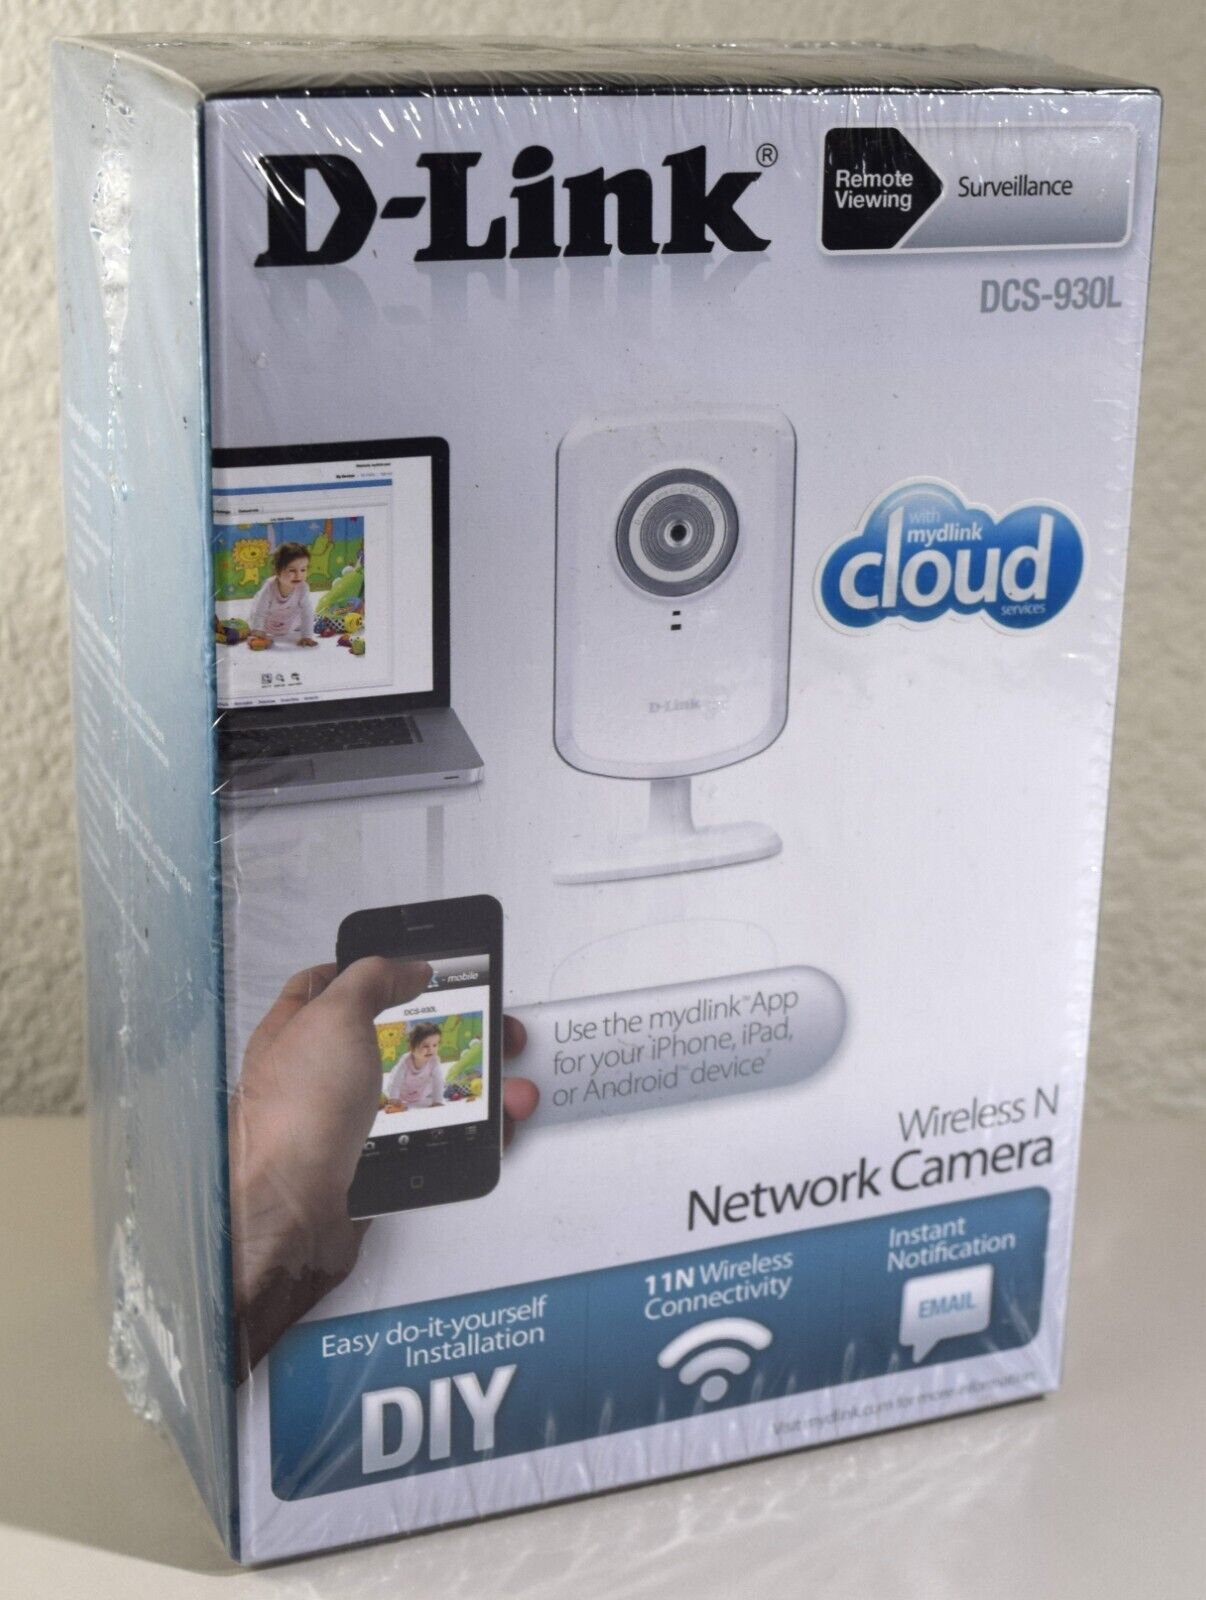 D-Link DCS-930L Wireless N Network Camera - Remote Viewing Surveillance - NEW